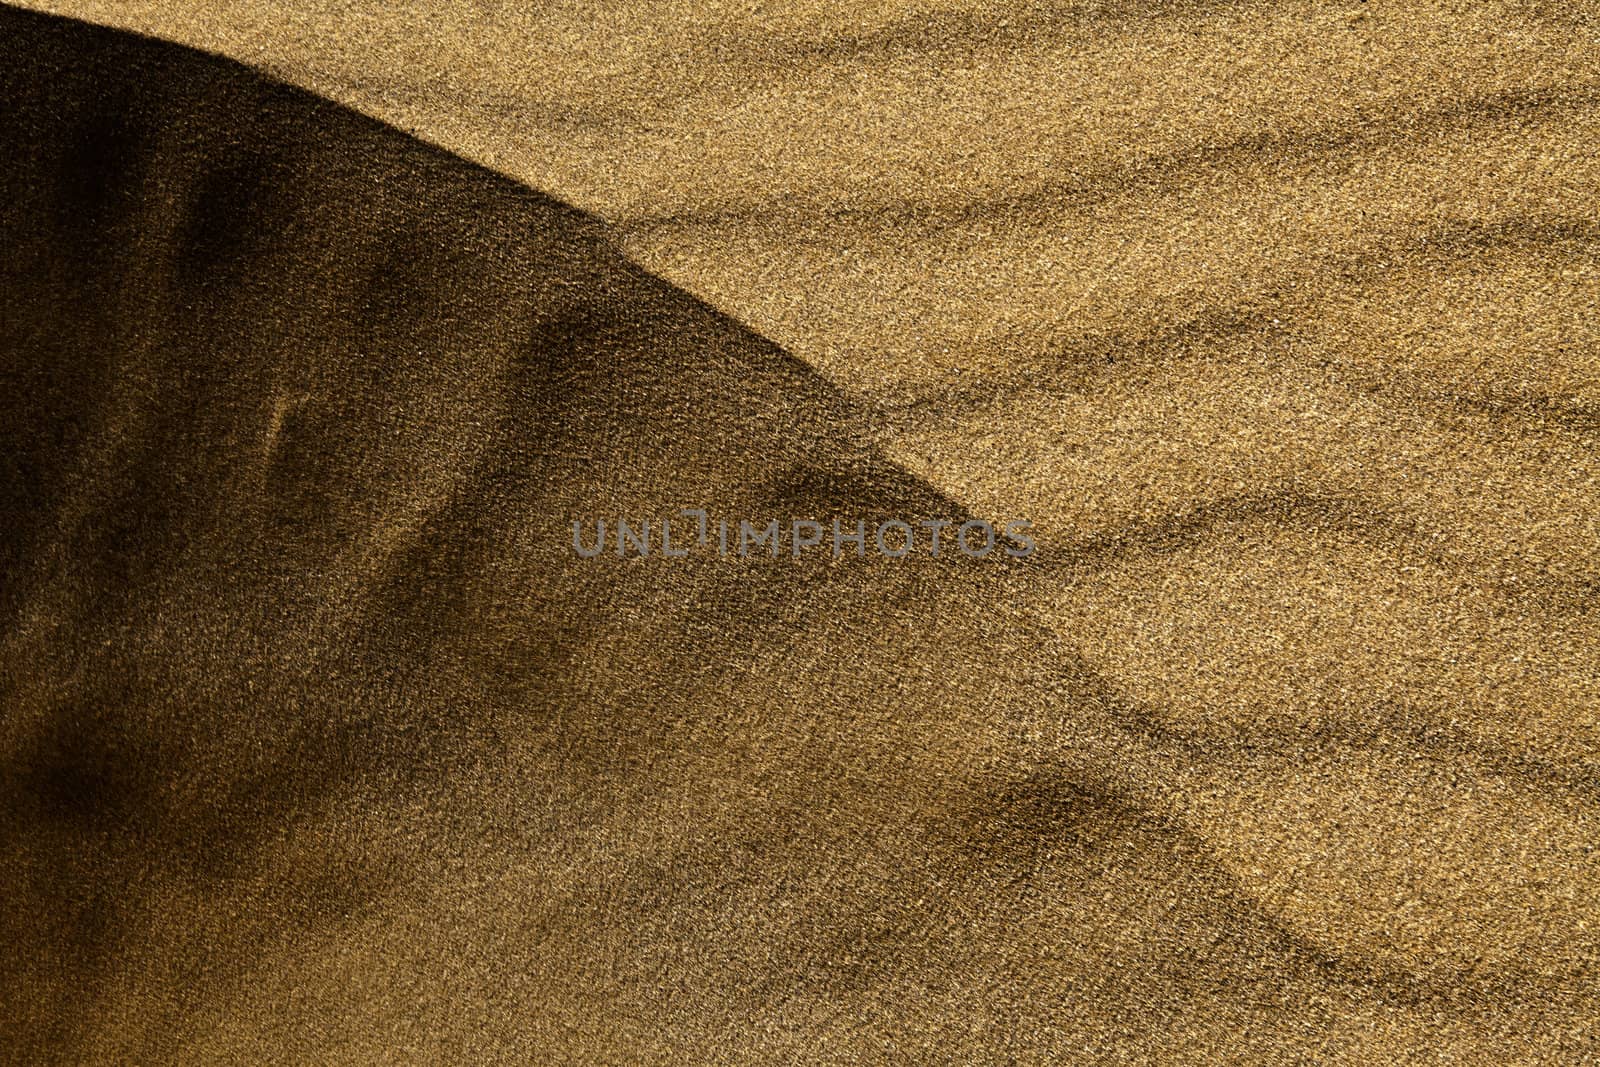 Abstract image showing light and shadow areas in sand dune detail